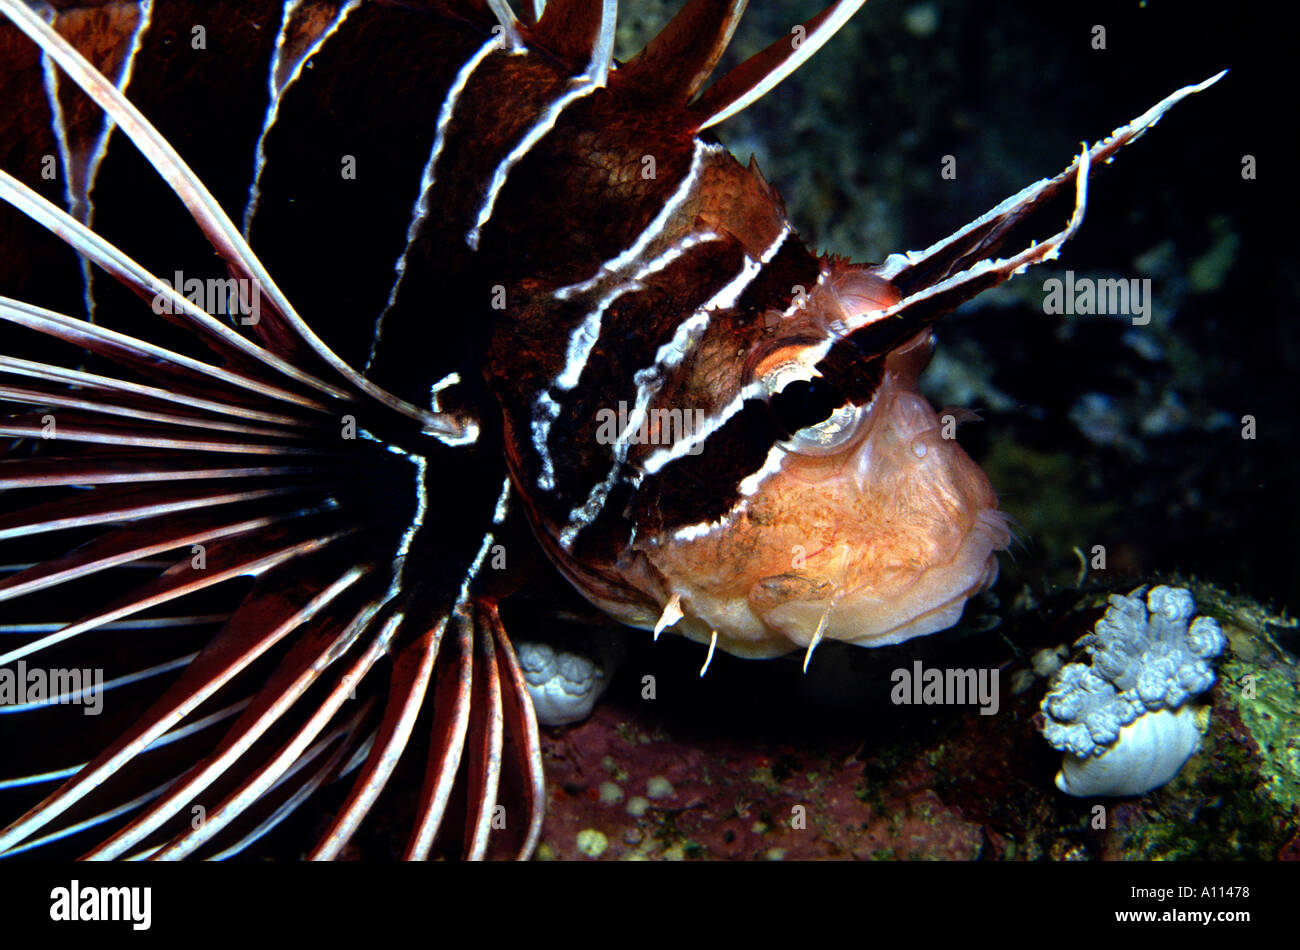 A STRIPED CLEARFIN LIONFISH Pterois radiata WITH HIS POISONOUS FINS EXTENDED STARES BACK INTO YOUR EYES Stock Photo